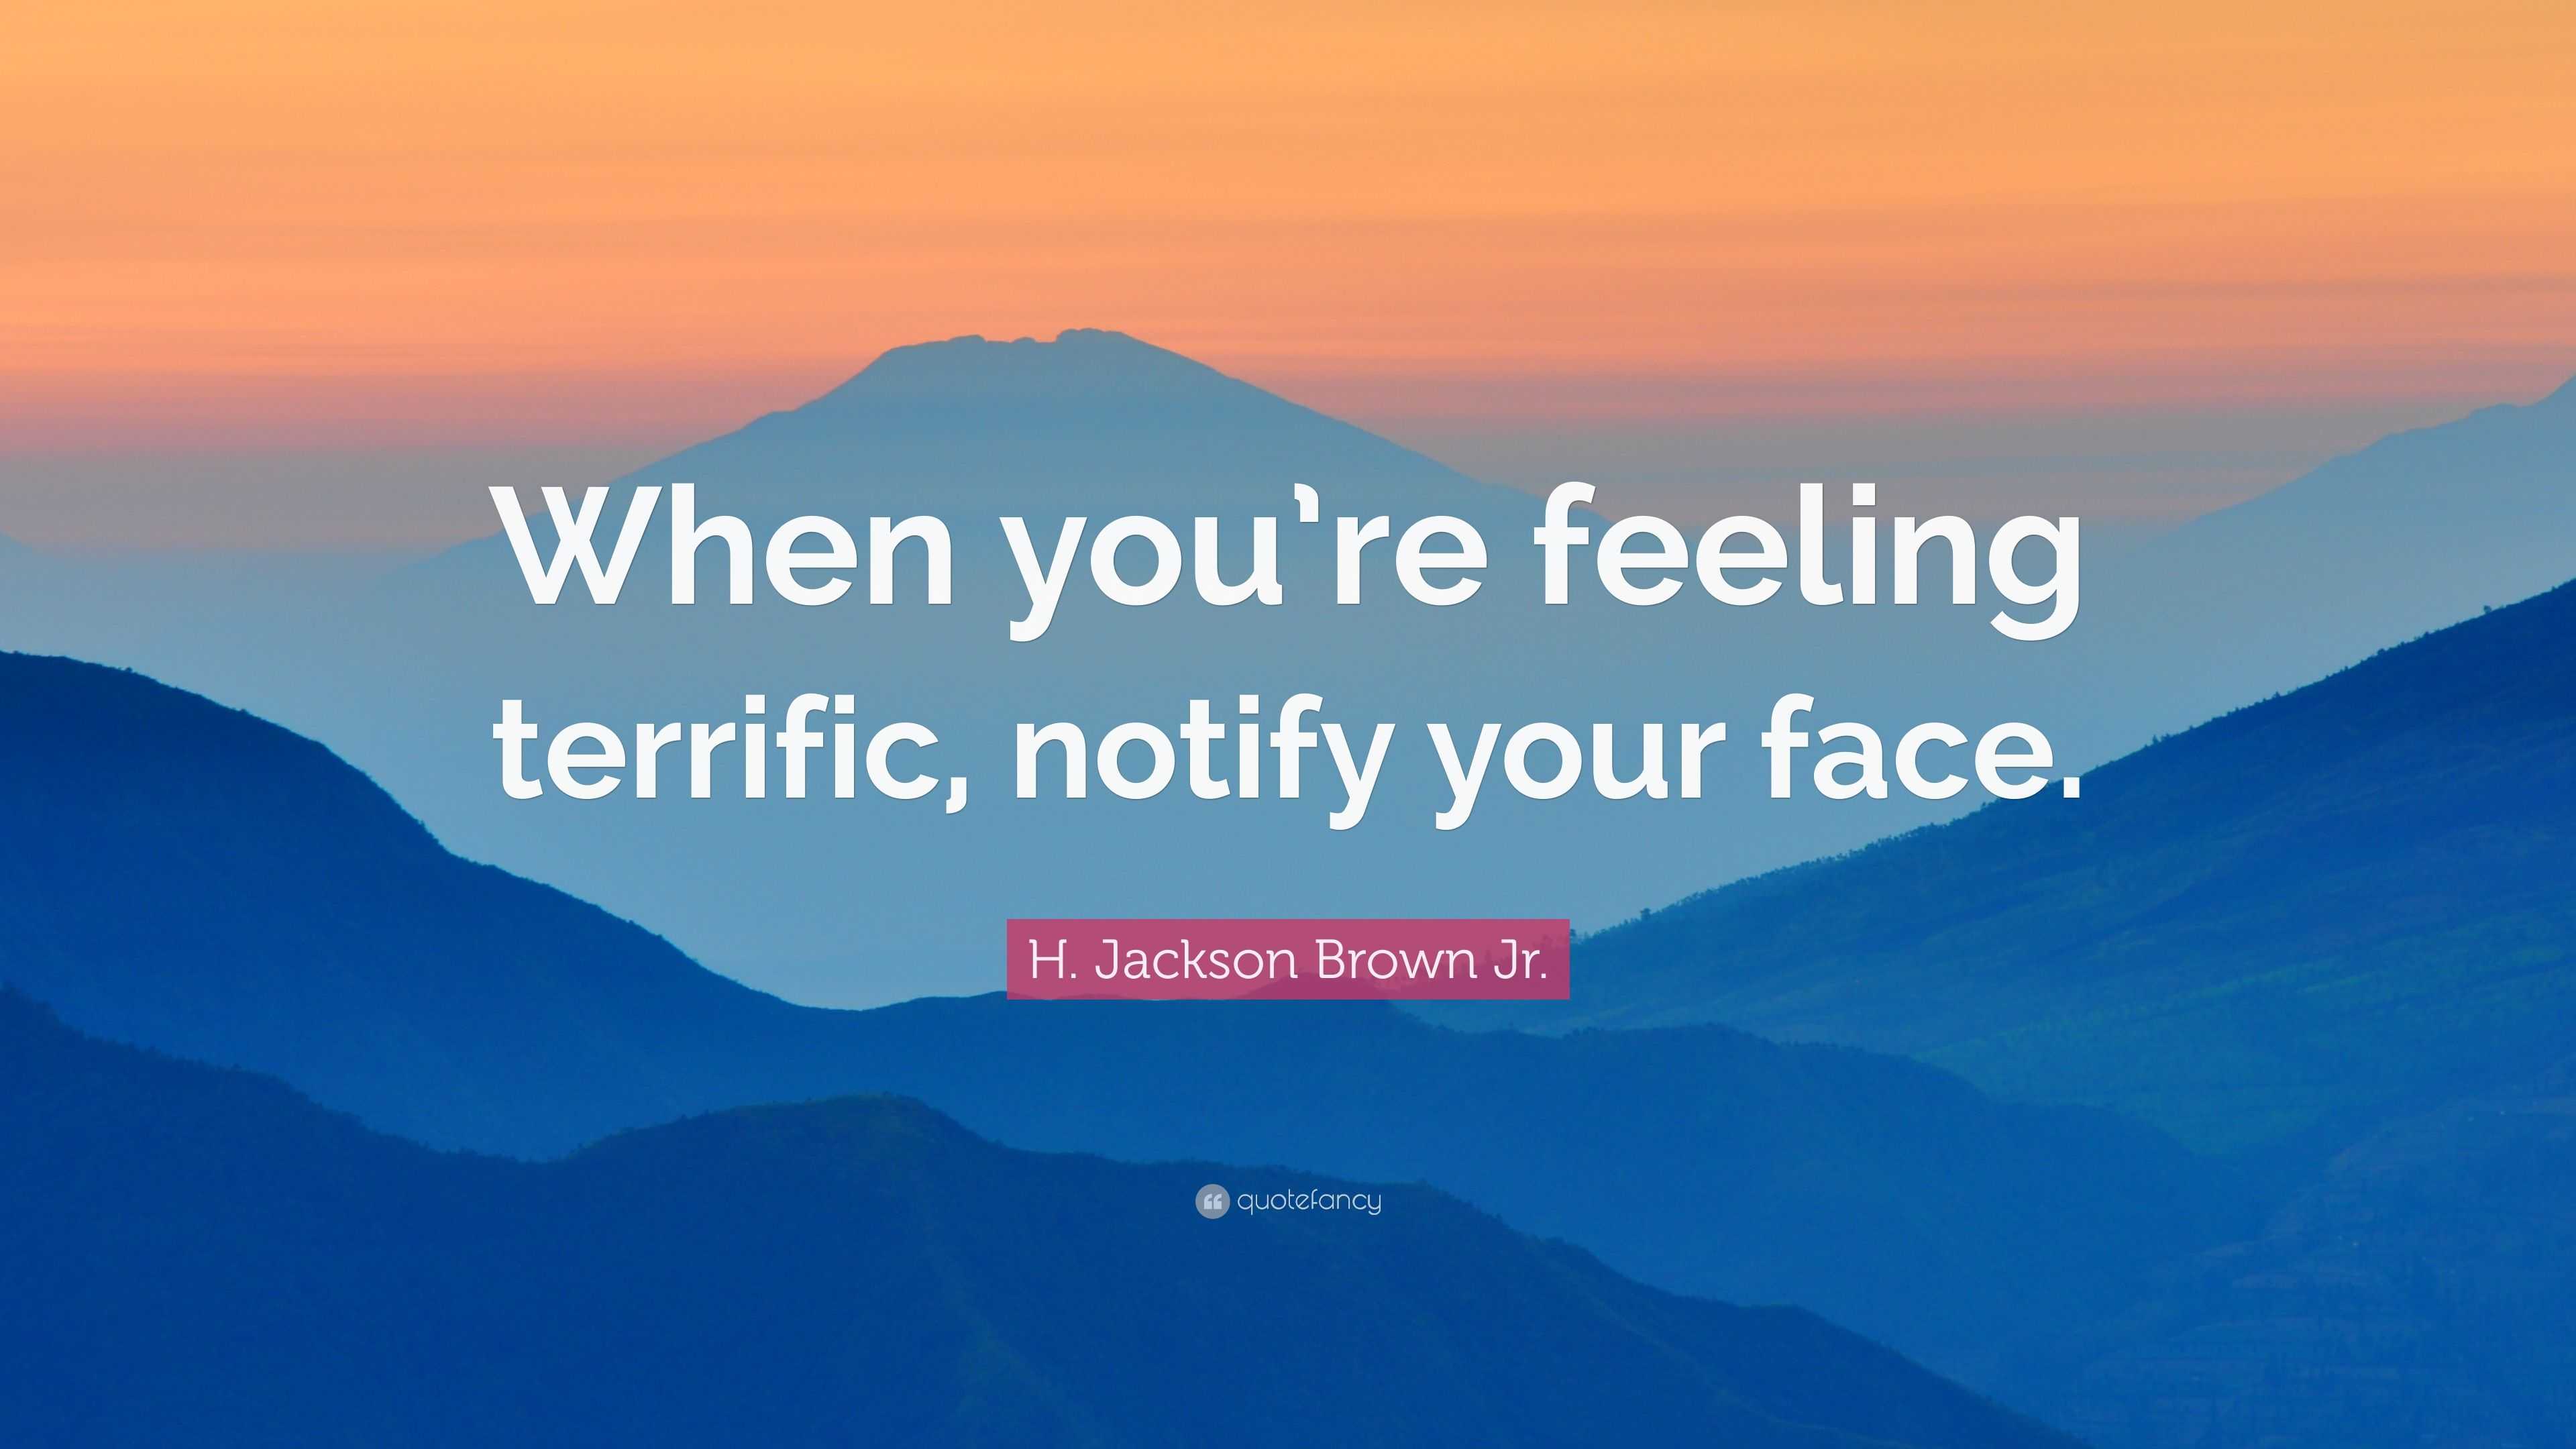 H. Jackson Brown Jr. Quote “When you’re feeling terrific, notify your